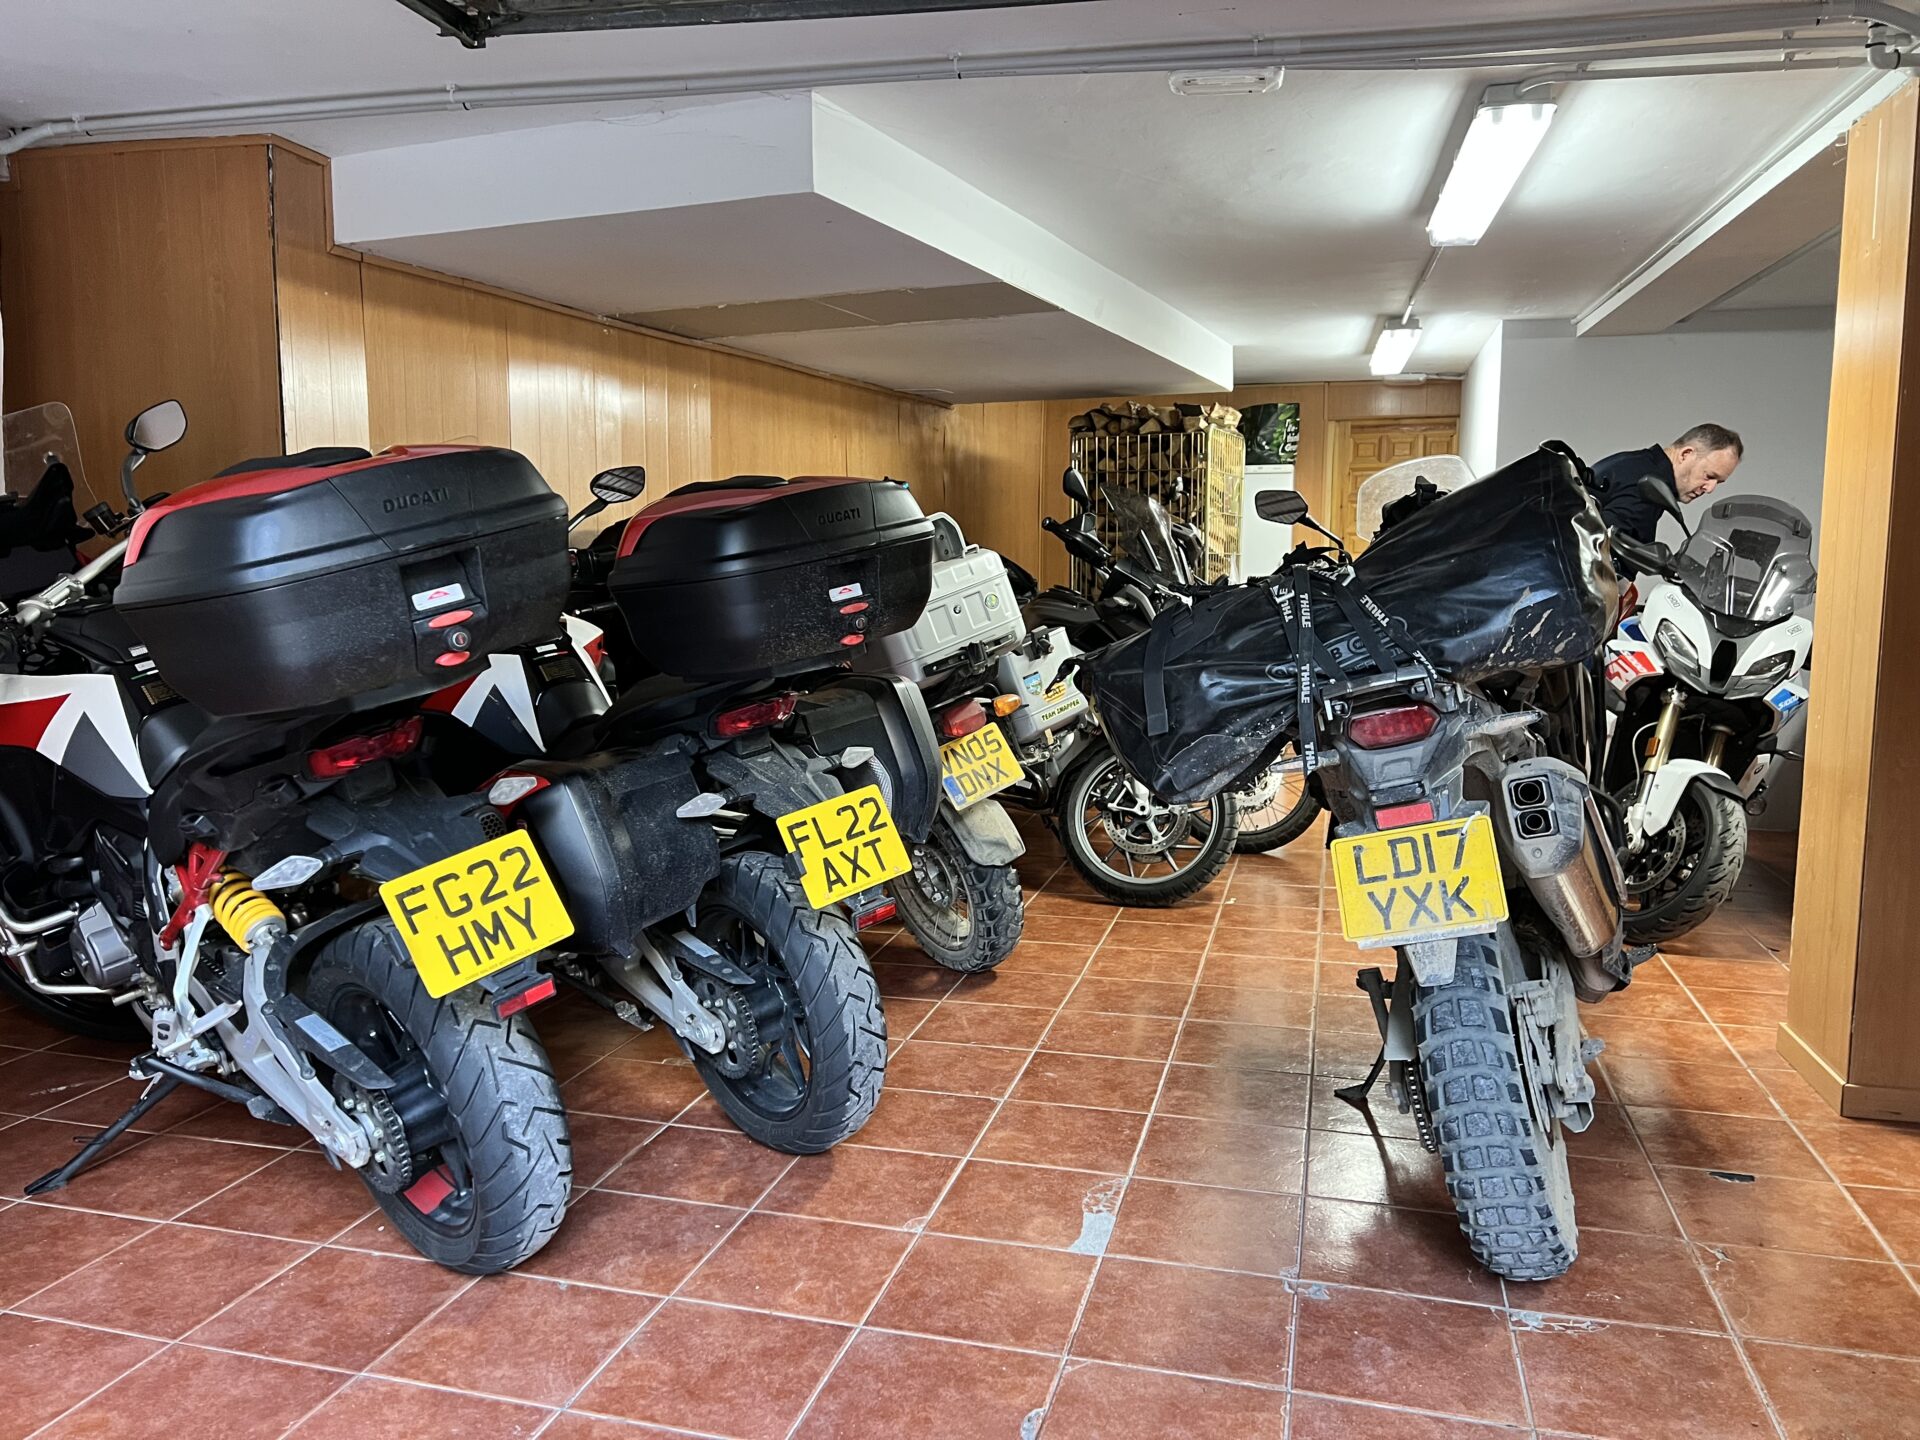 Garage for Motorcbikes and Cycles